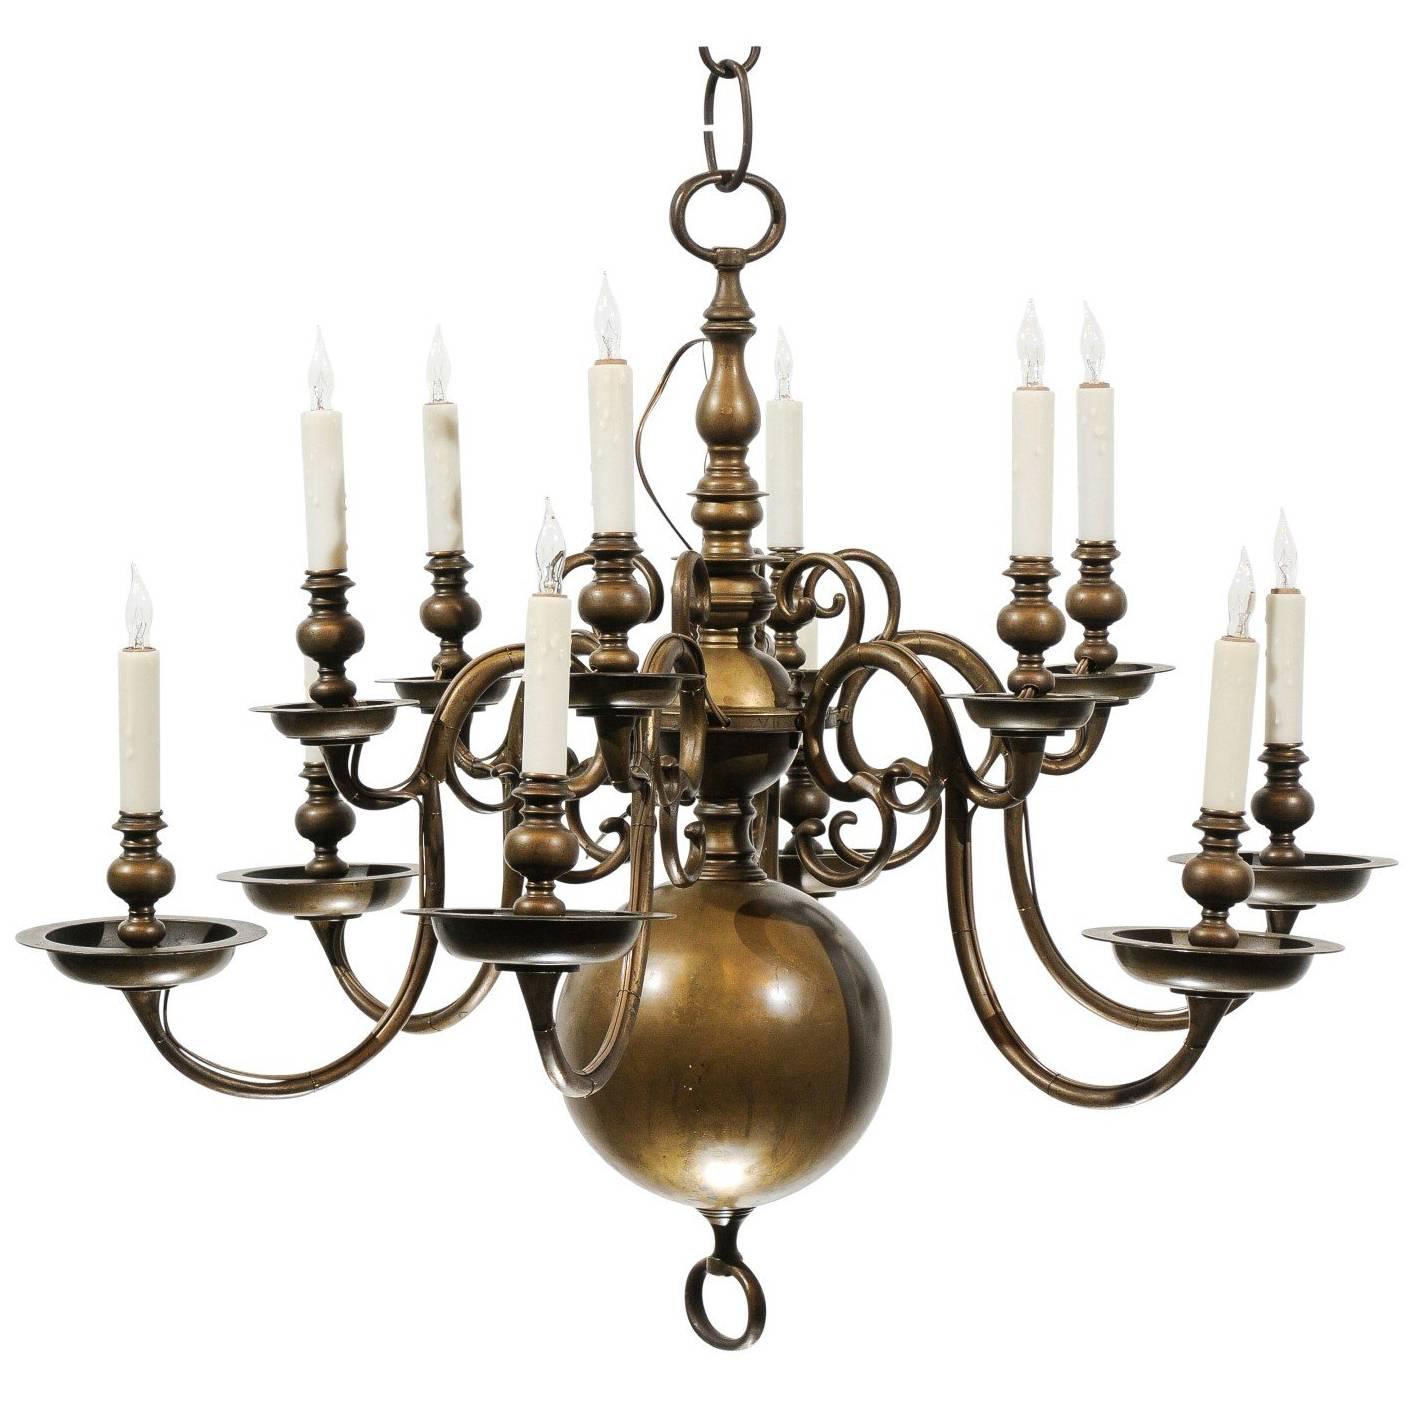 Large 18th Century Dutch Brass Chandelier with 12 Lights